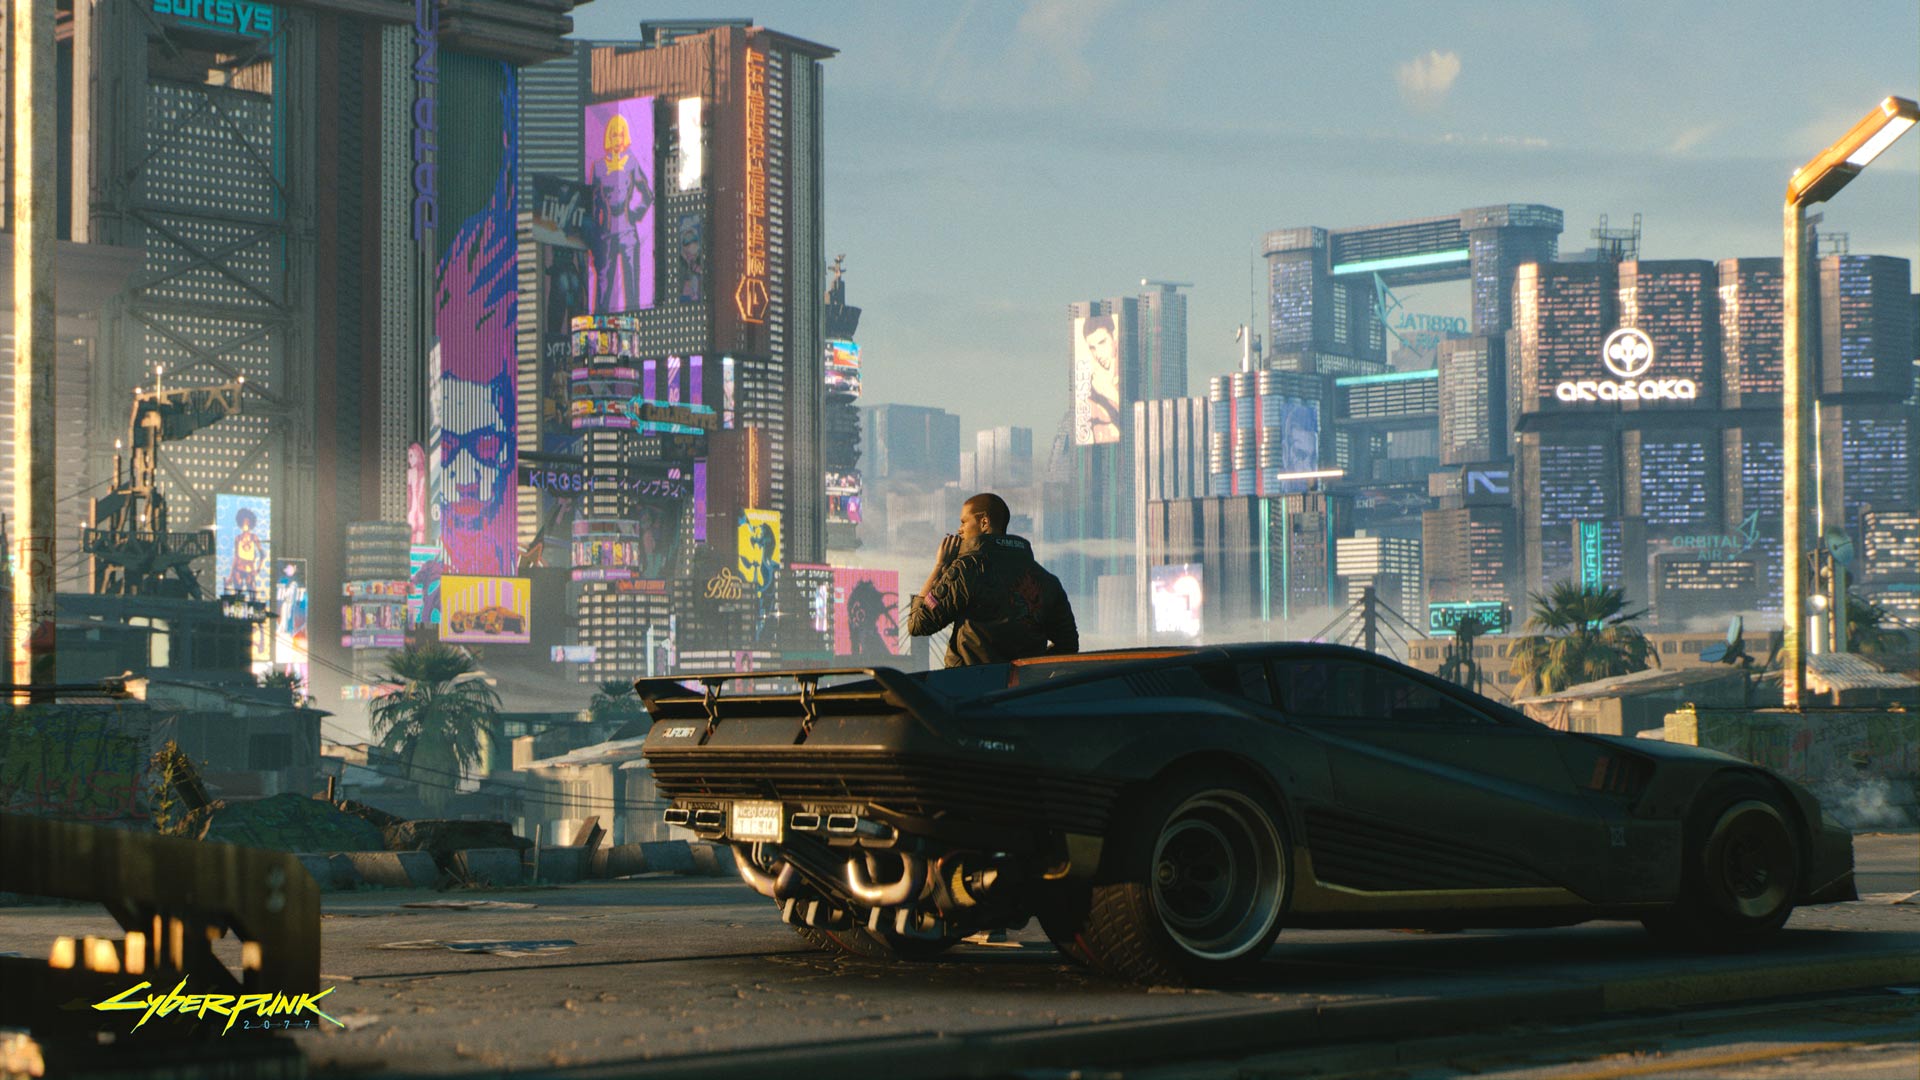 As Cyberpunk 2077 Development Intensifies, CD Projekt Red Pledges To Be 'More Humane' To Its Workers